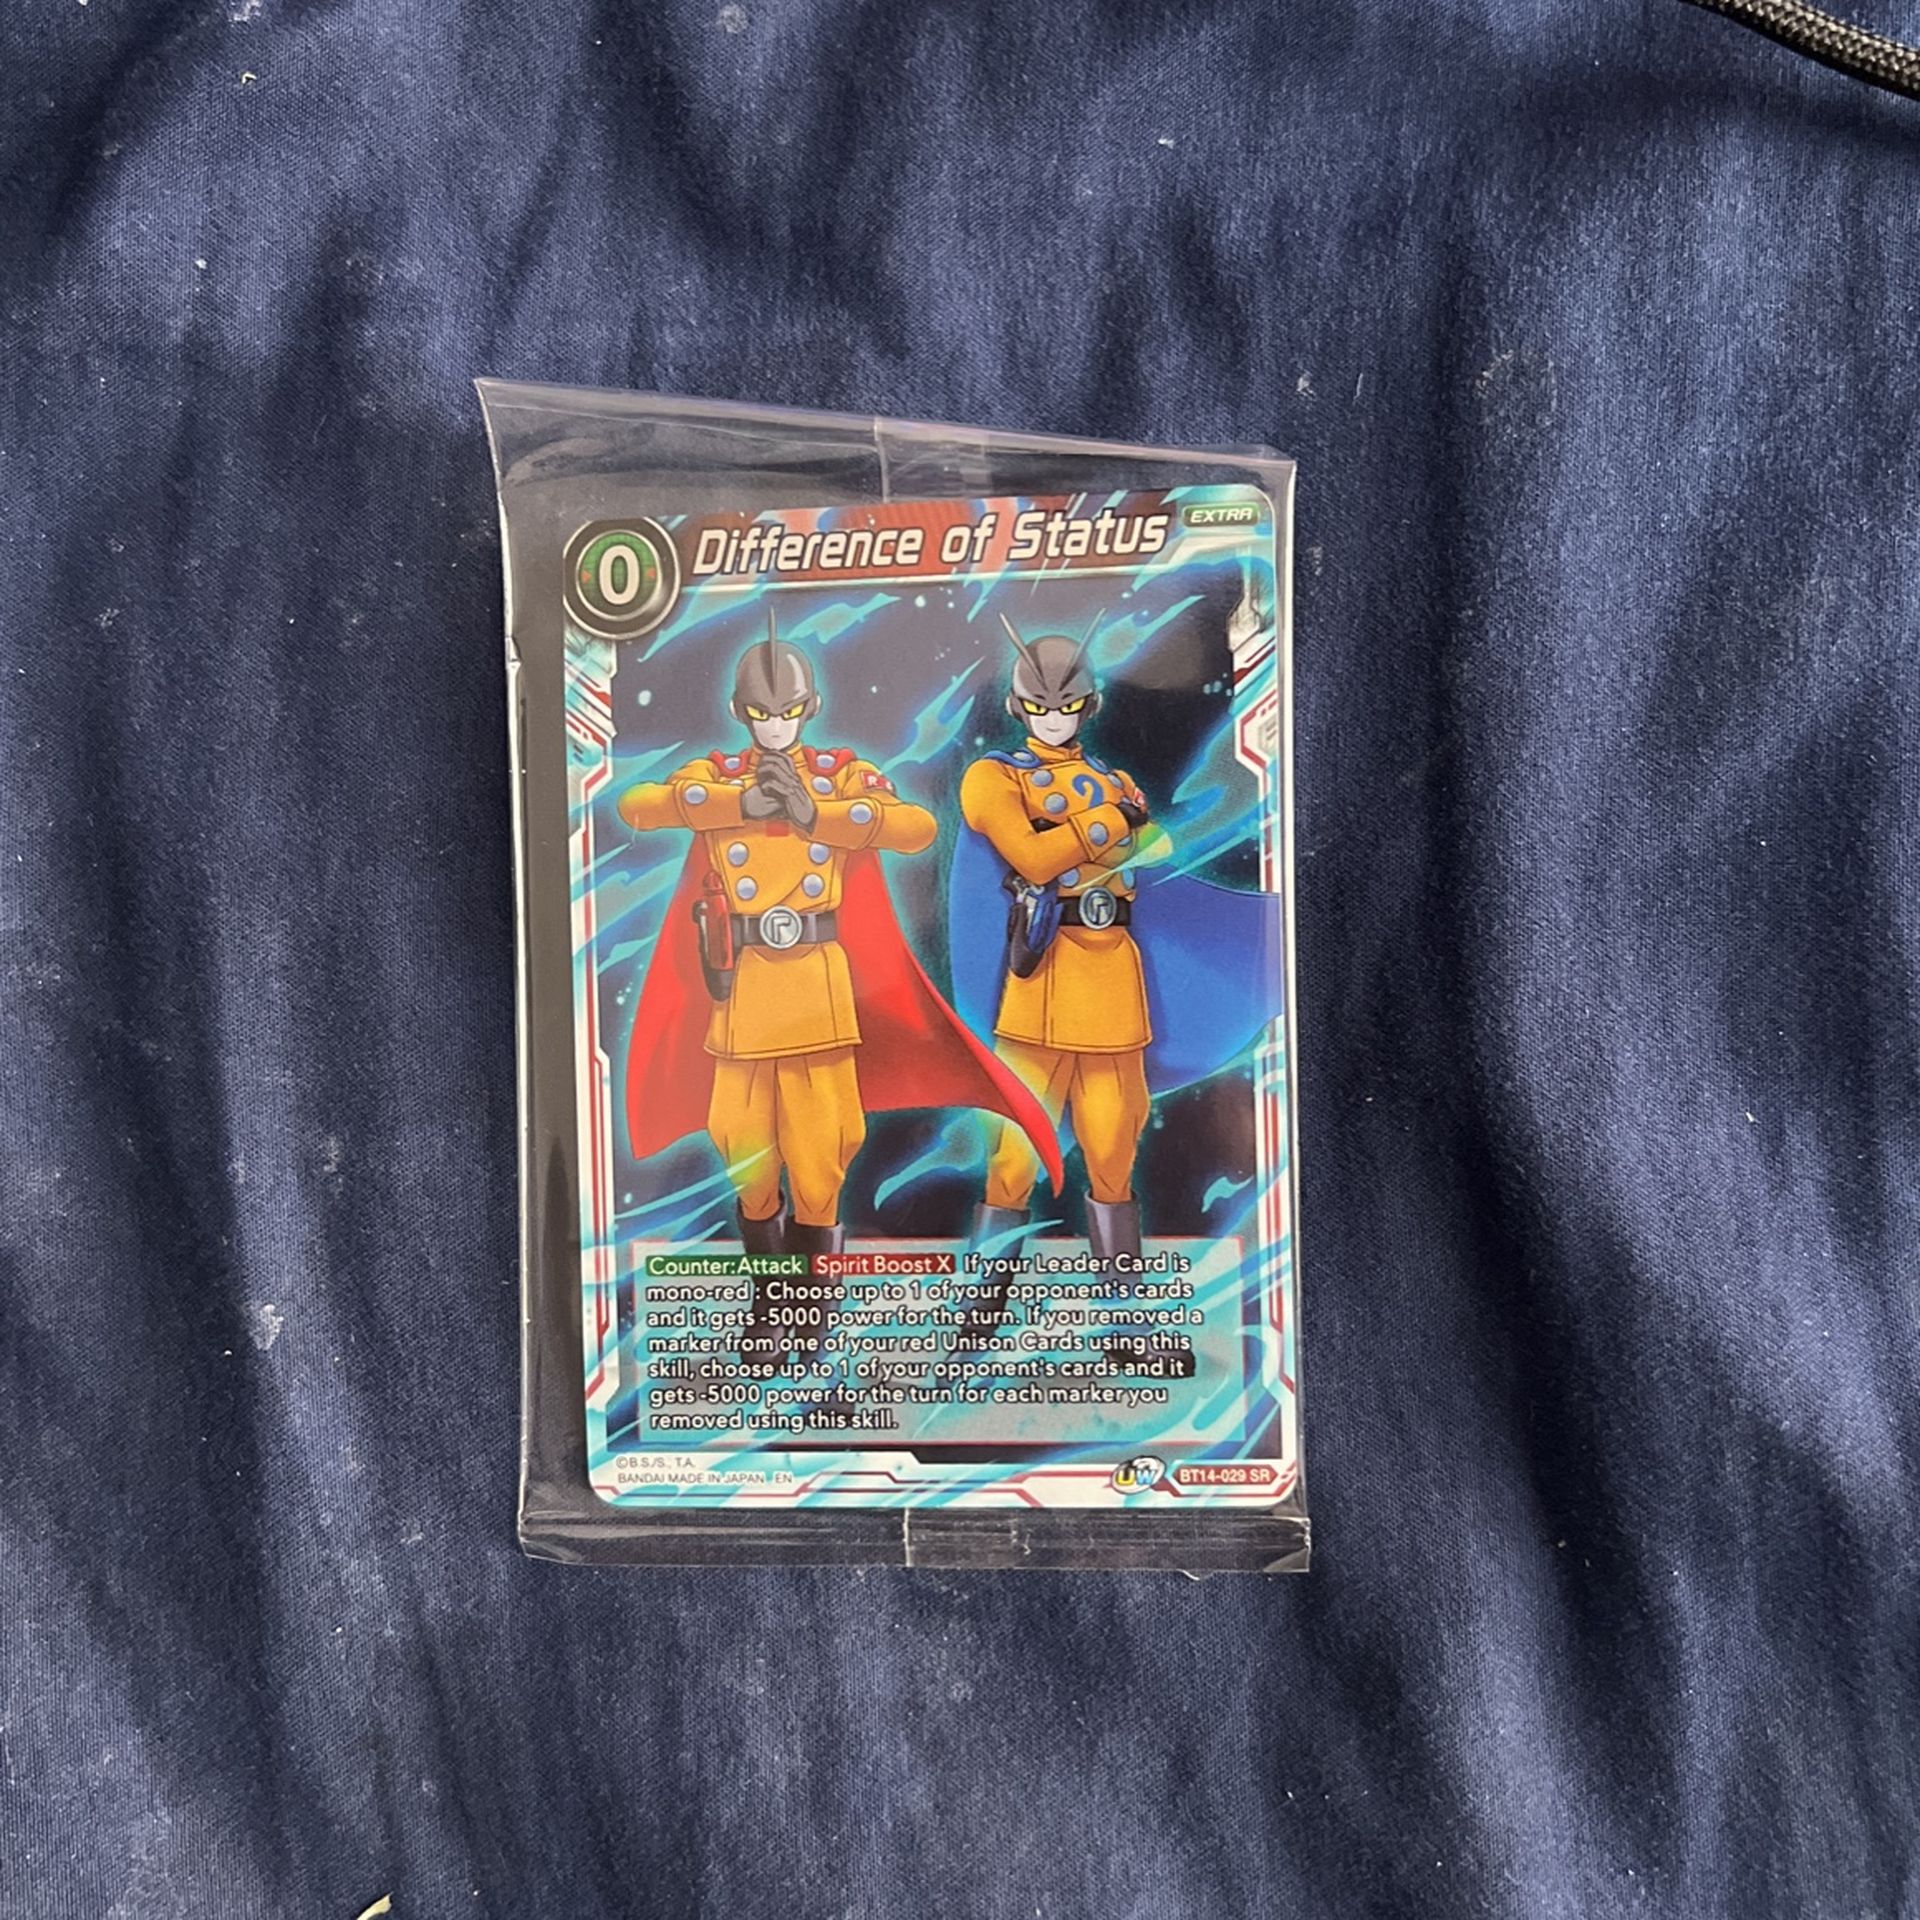 DRAGON BALL SUPER CARD GAME Difference Of Status Promo Card gamma 1 &2 BT14-029